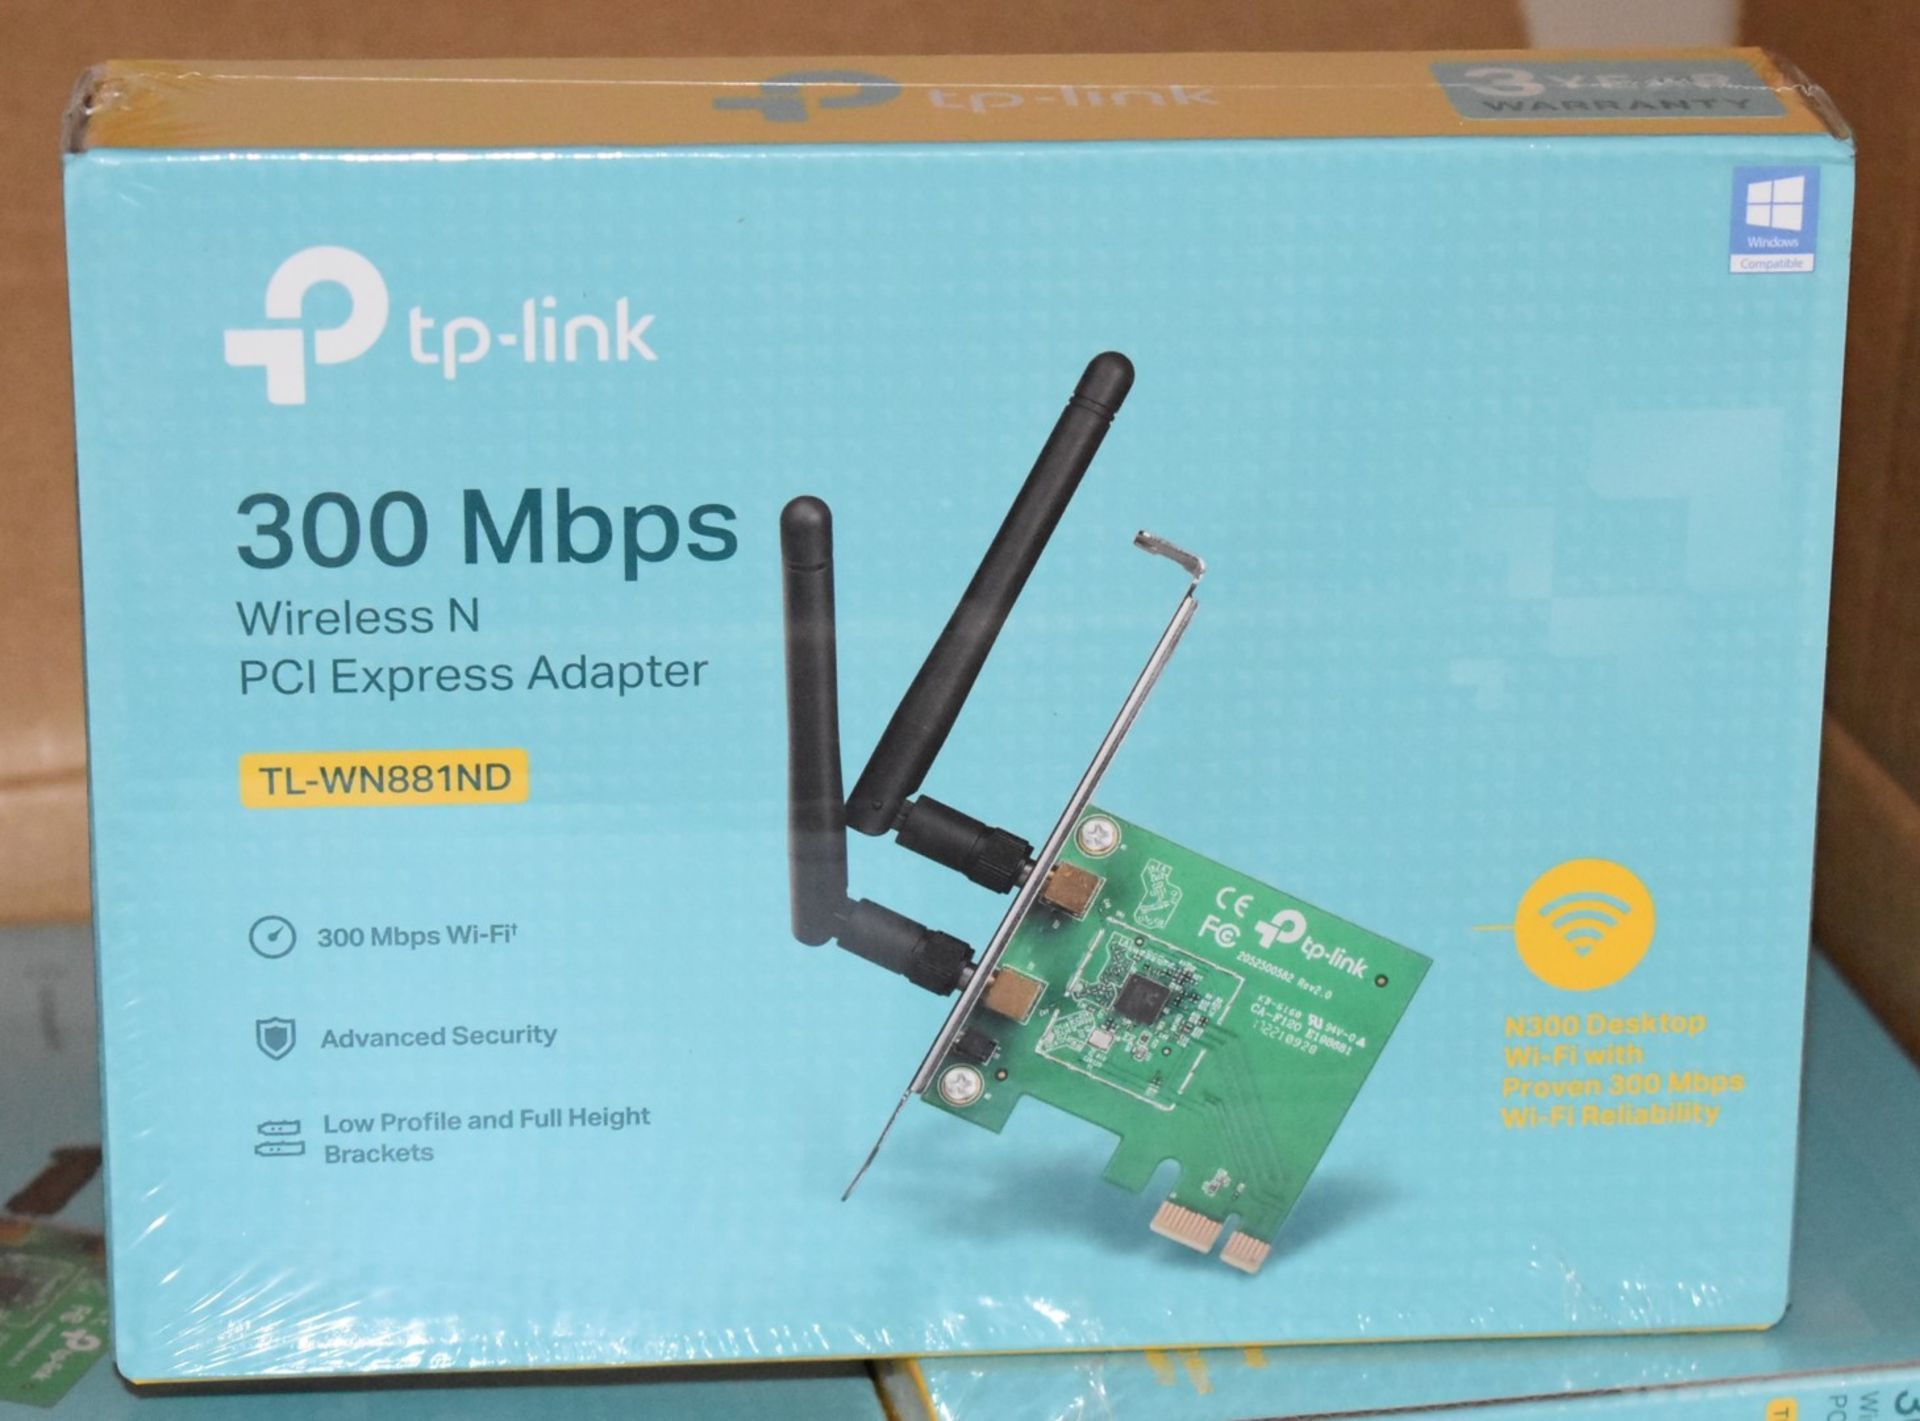 4 x TP Link 300Mbps Wireless N PCI Express Adapters - TL-WN881ND - New Sealed Stock - Image 3 of 6